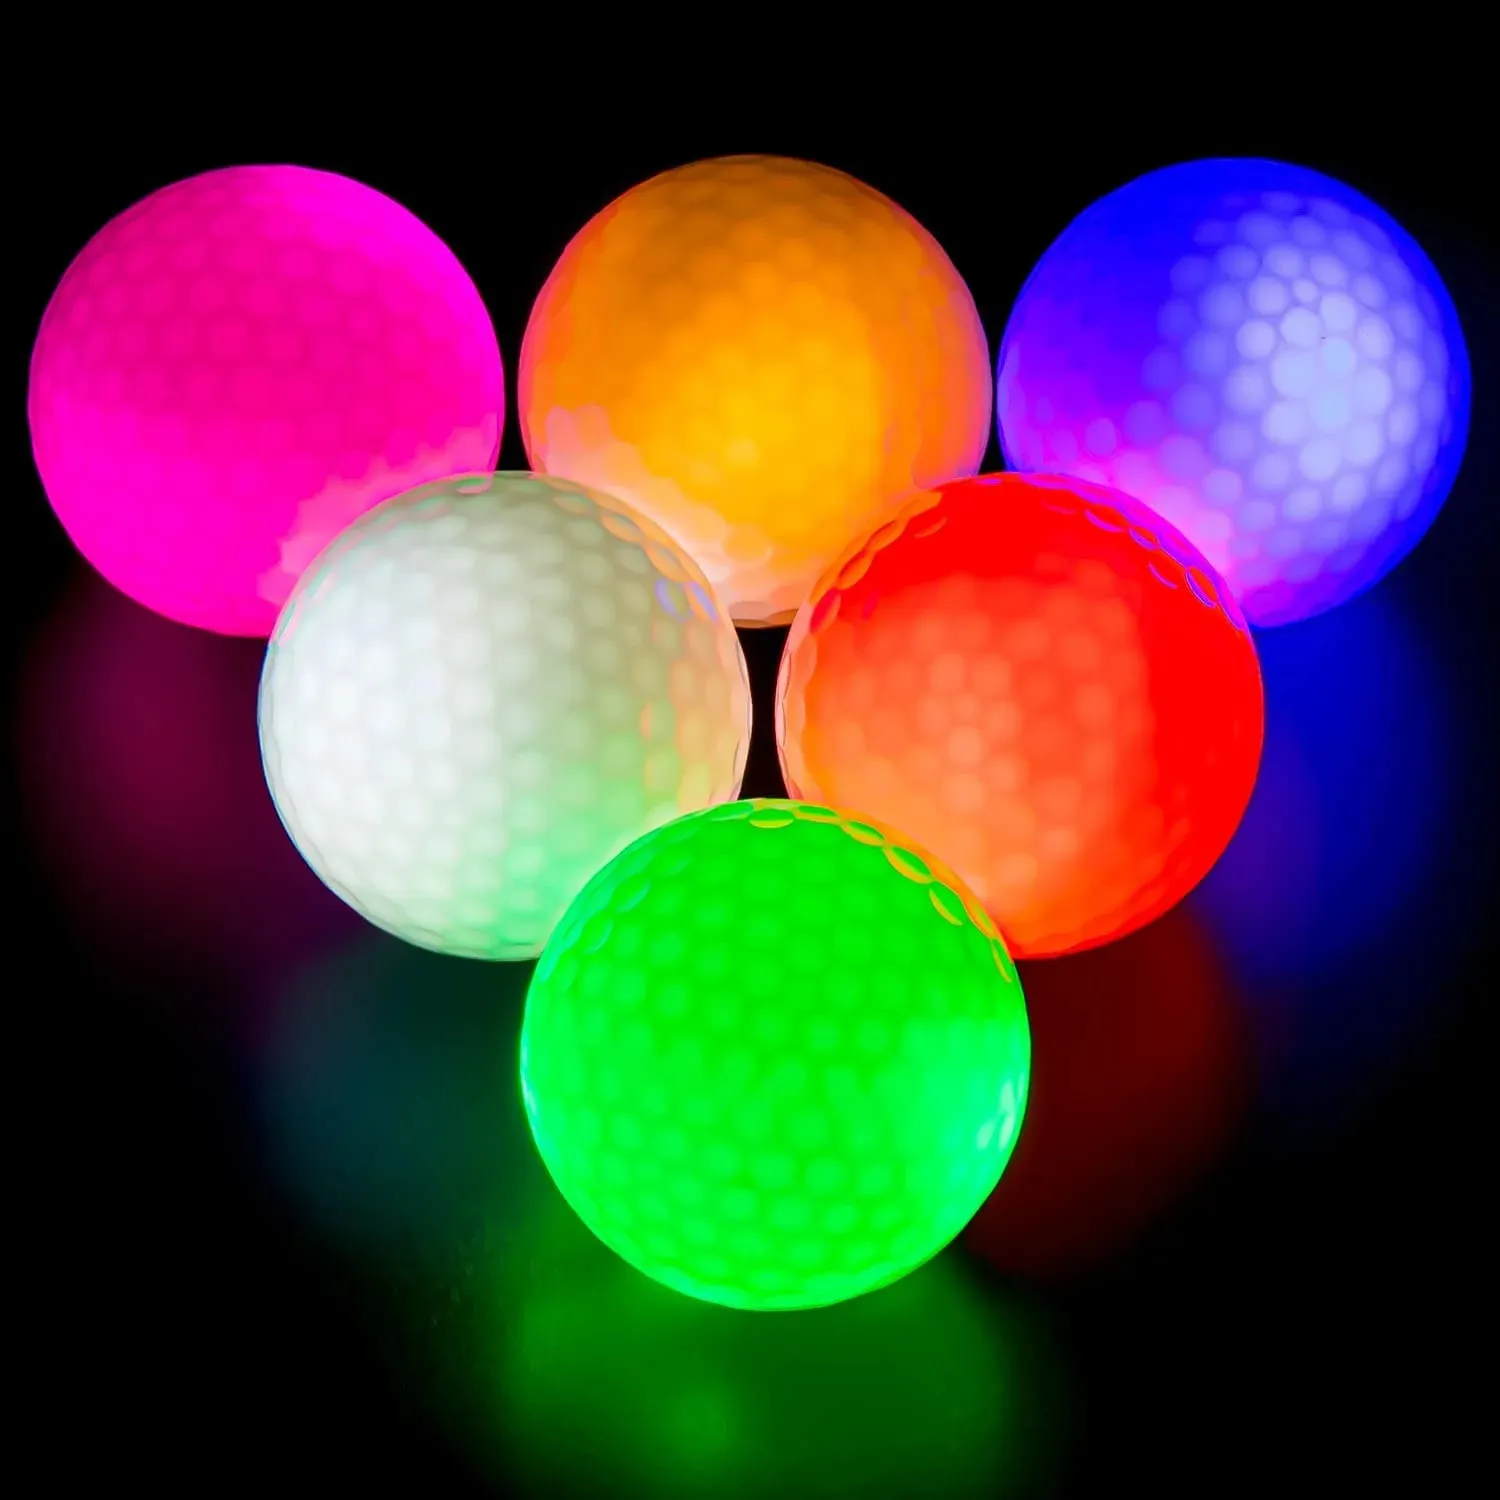 6st Ball For Night Sports Super Bright LED Glowing in the Dark Golf Ball Long Light Up Golf Ball 240323